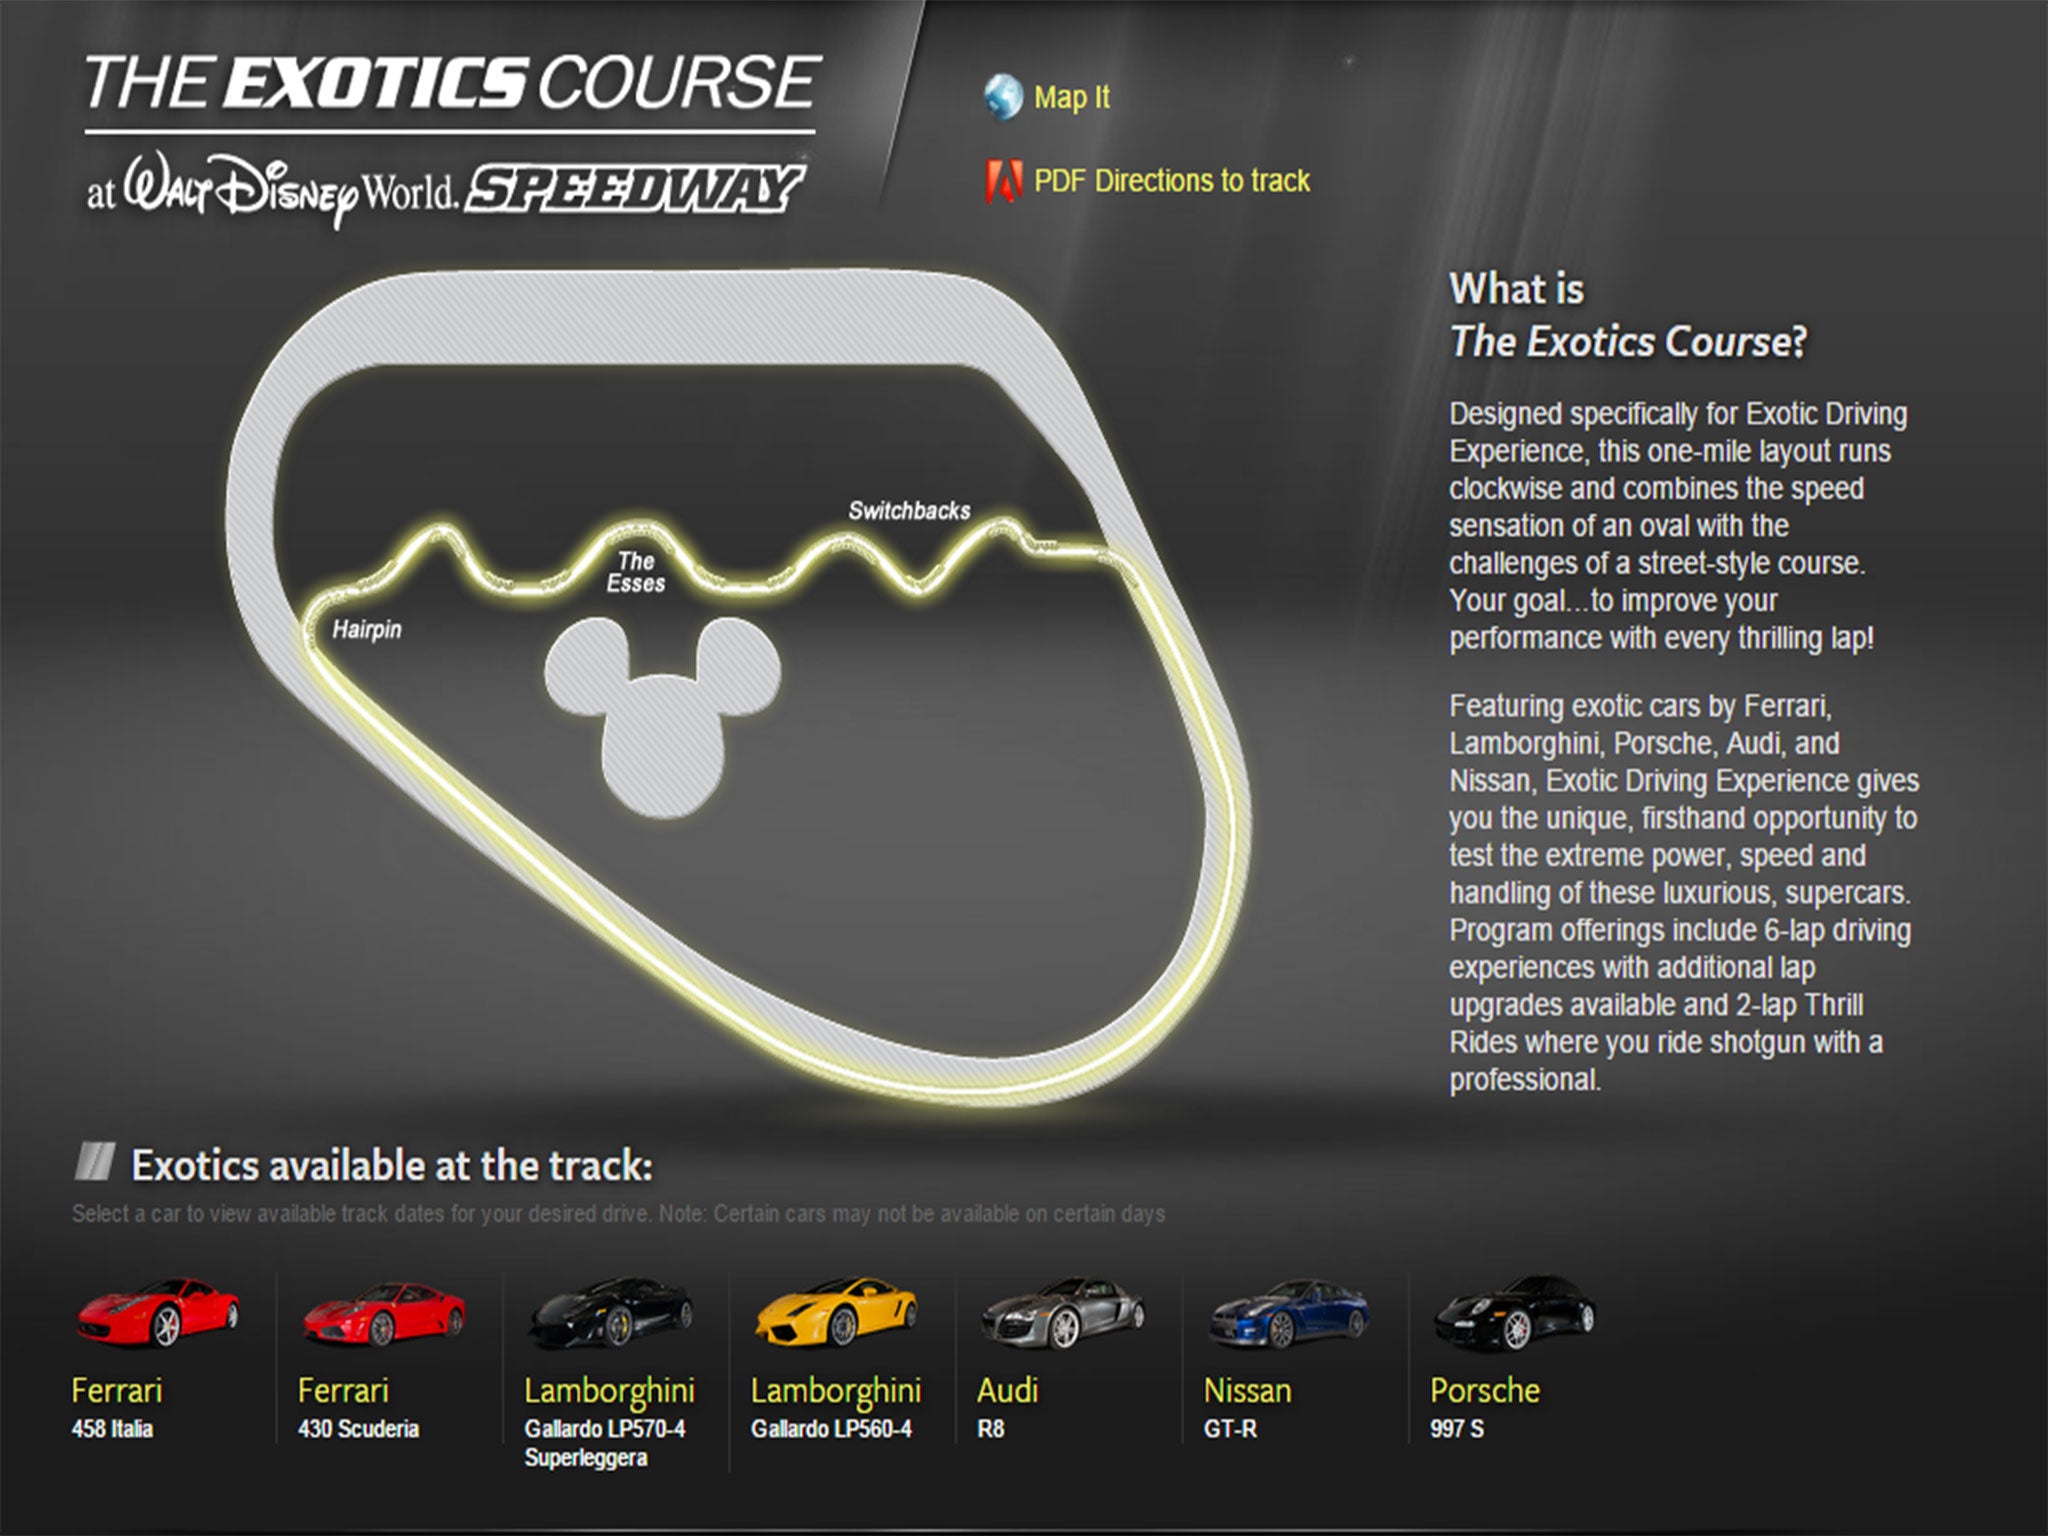 The Exotics Speedway course advertised online